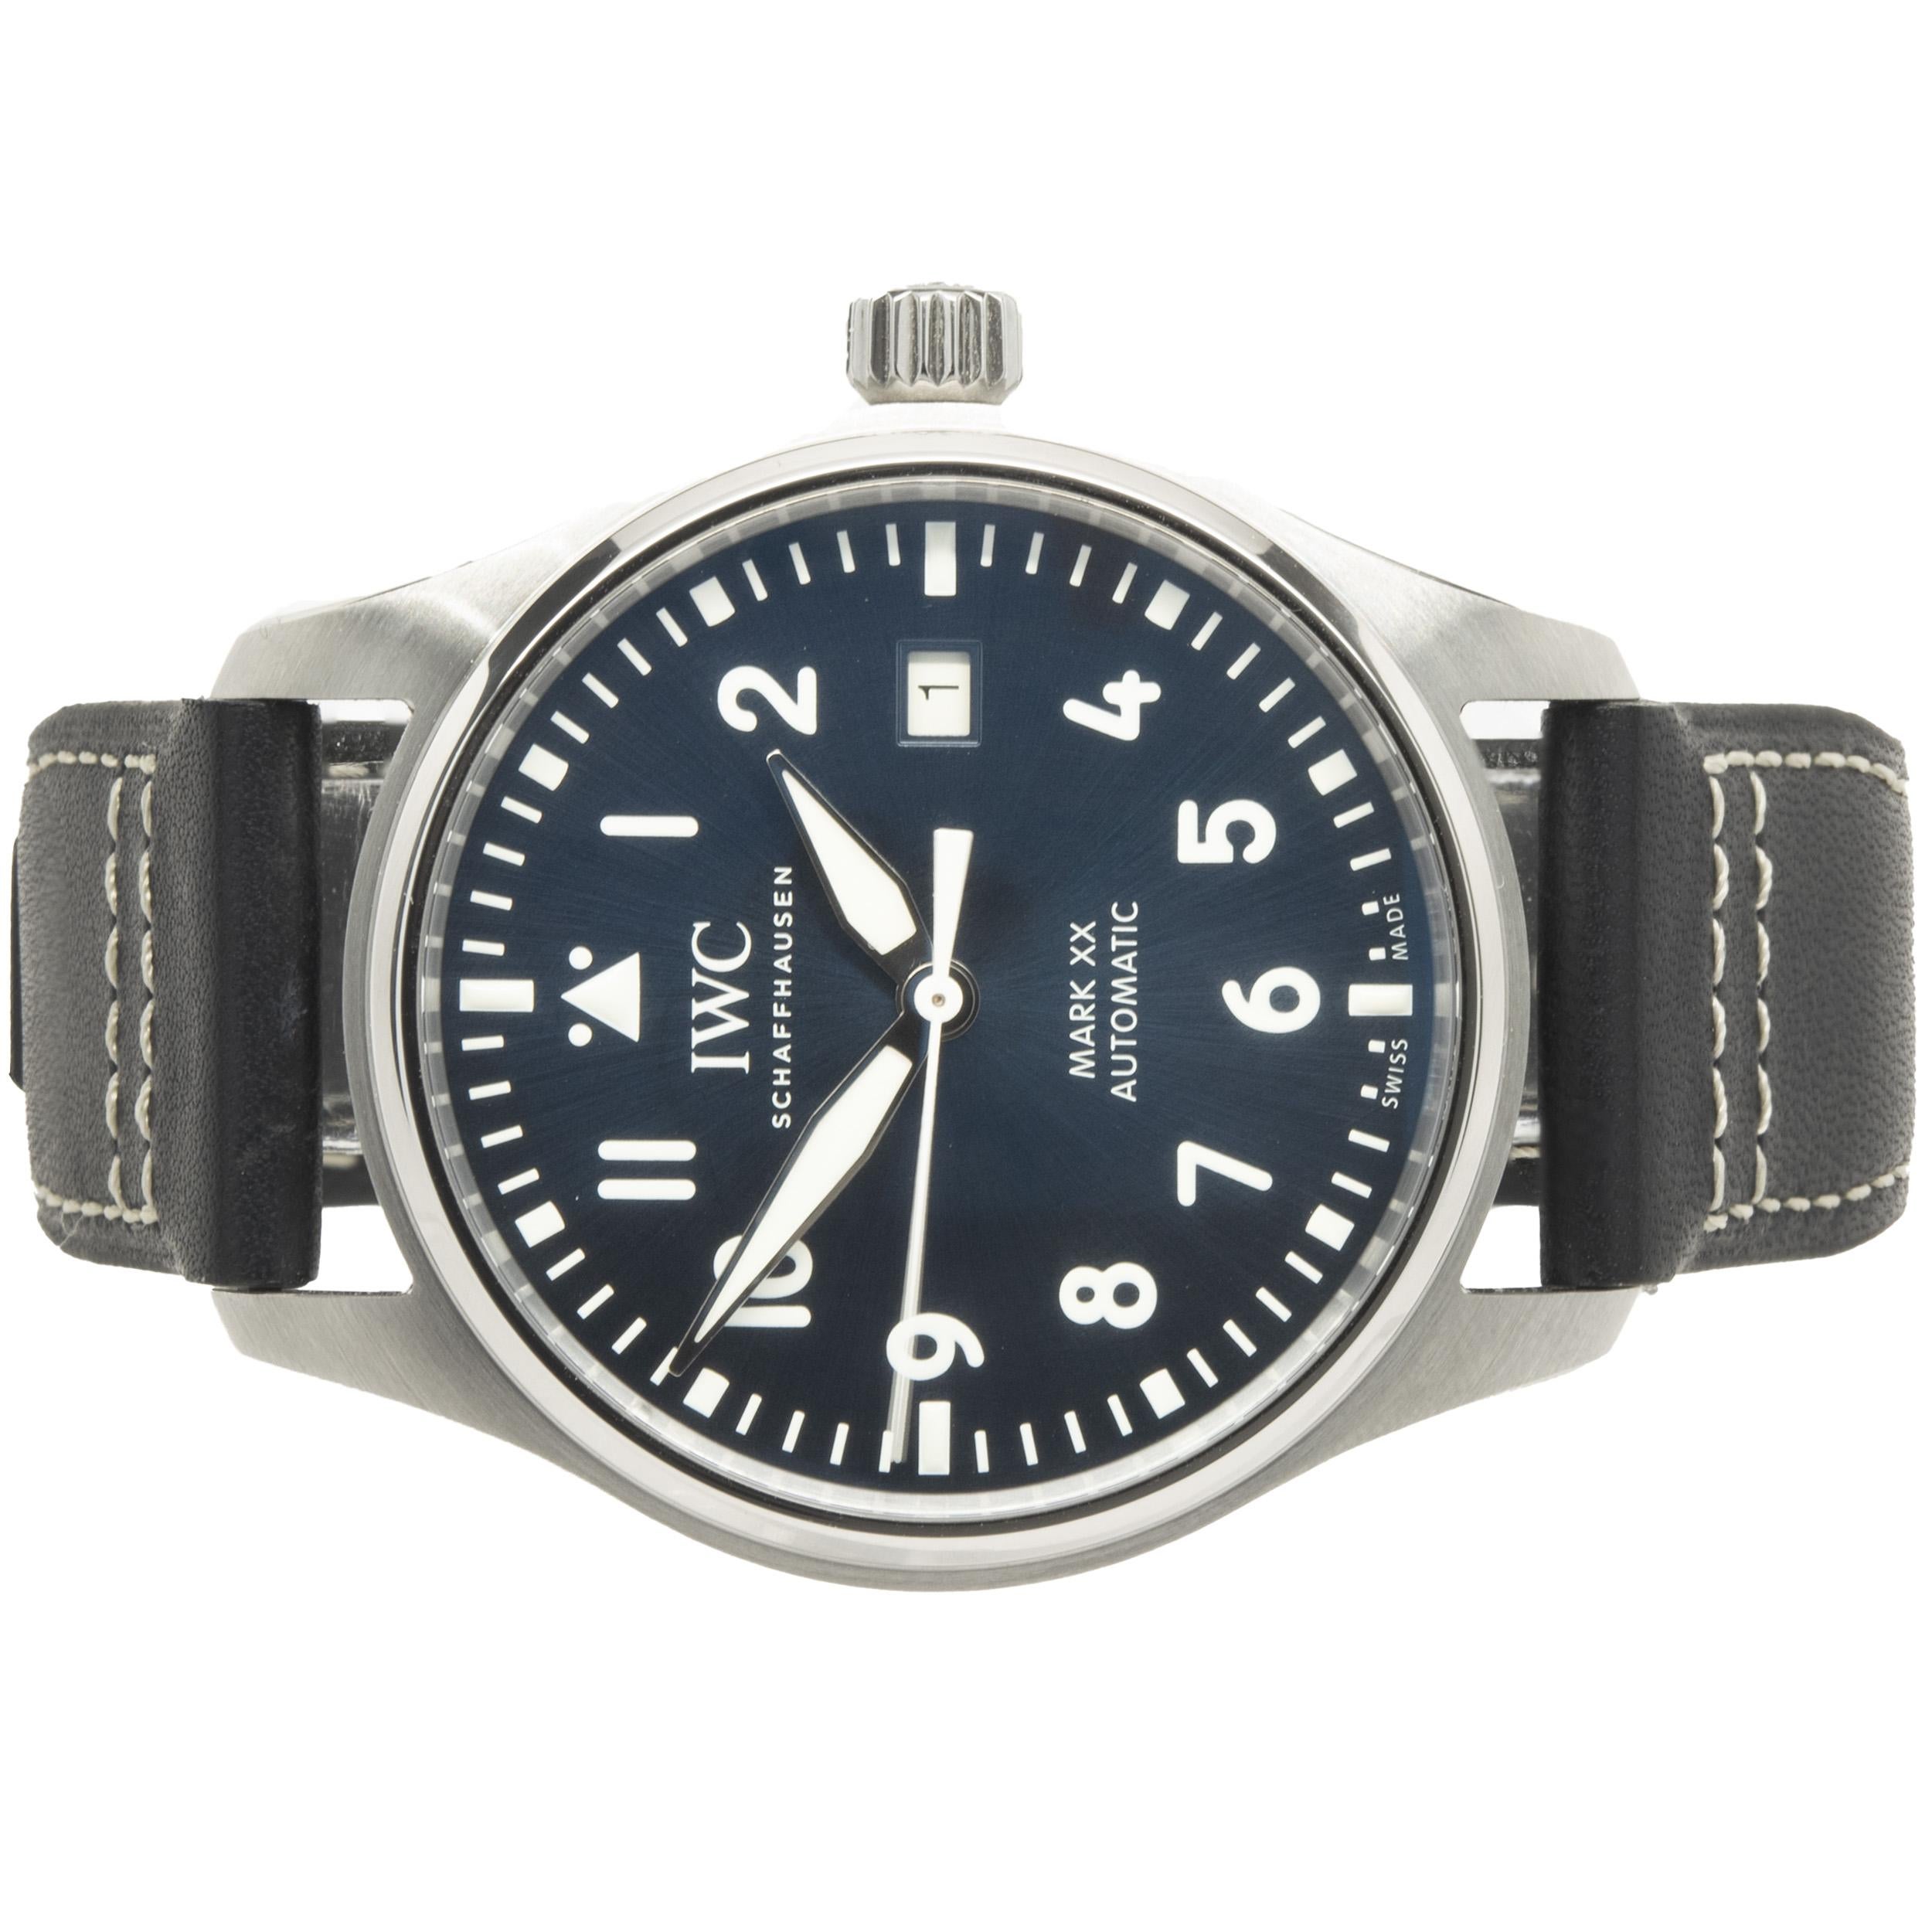 Brand: IWC
Movement: automatic
Function: hour, minutes, seconds, date
Case: 40mm stainless steel round case, sapphire crystal
Band: black leather, stainless steel buckle
Dial: blue arabic 
Reference #: IW328203
Serial #: 6382XXX
Complete with box